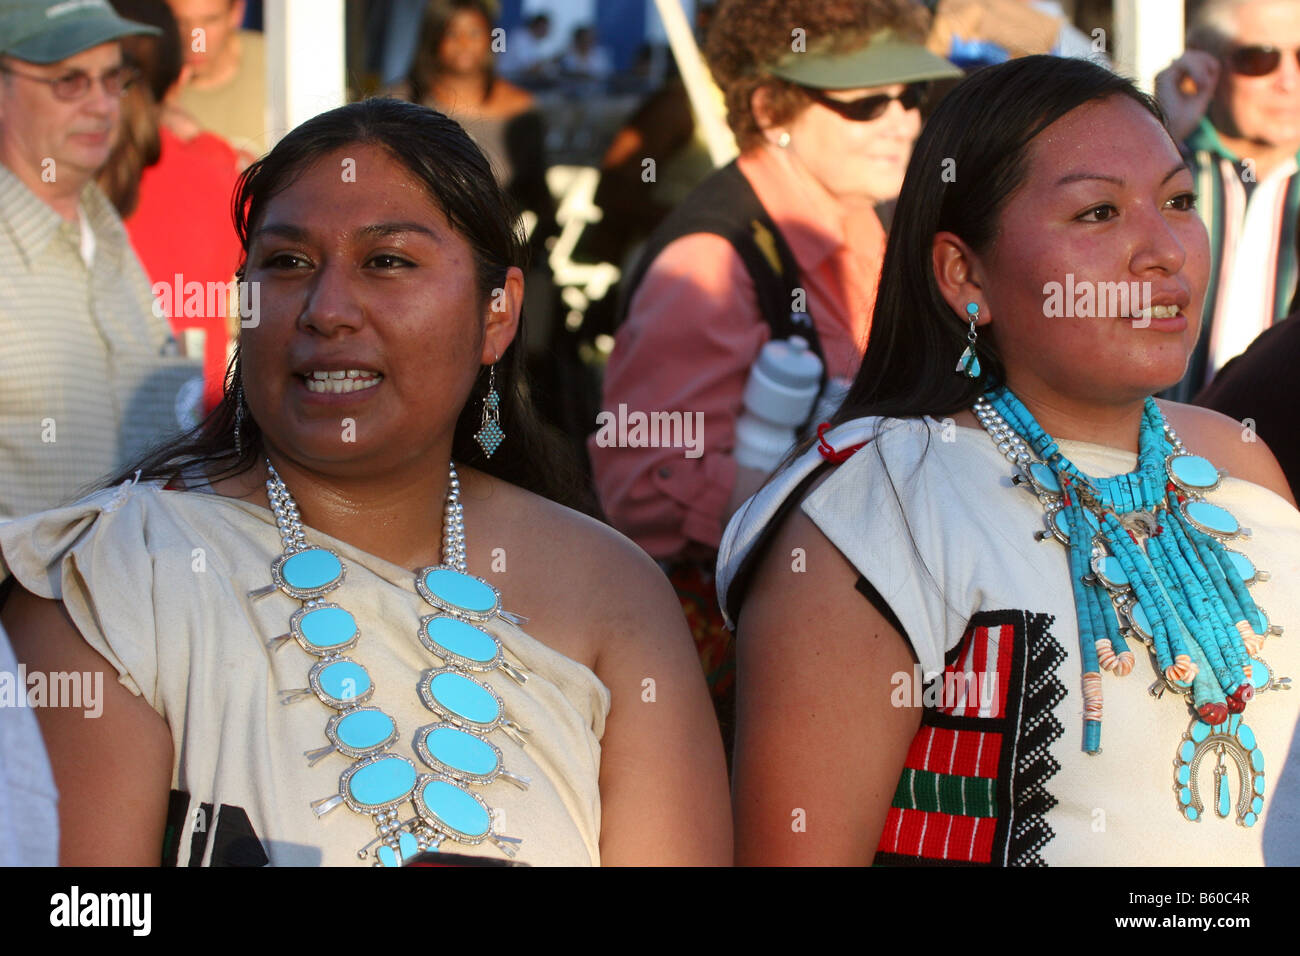 young Zuni native american women after a folk festival performance Stock Photo